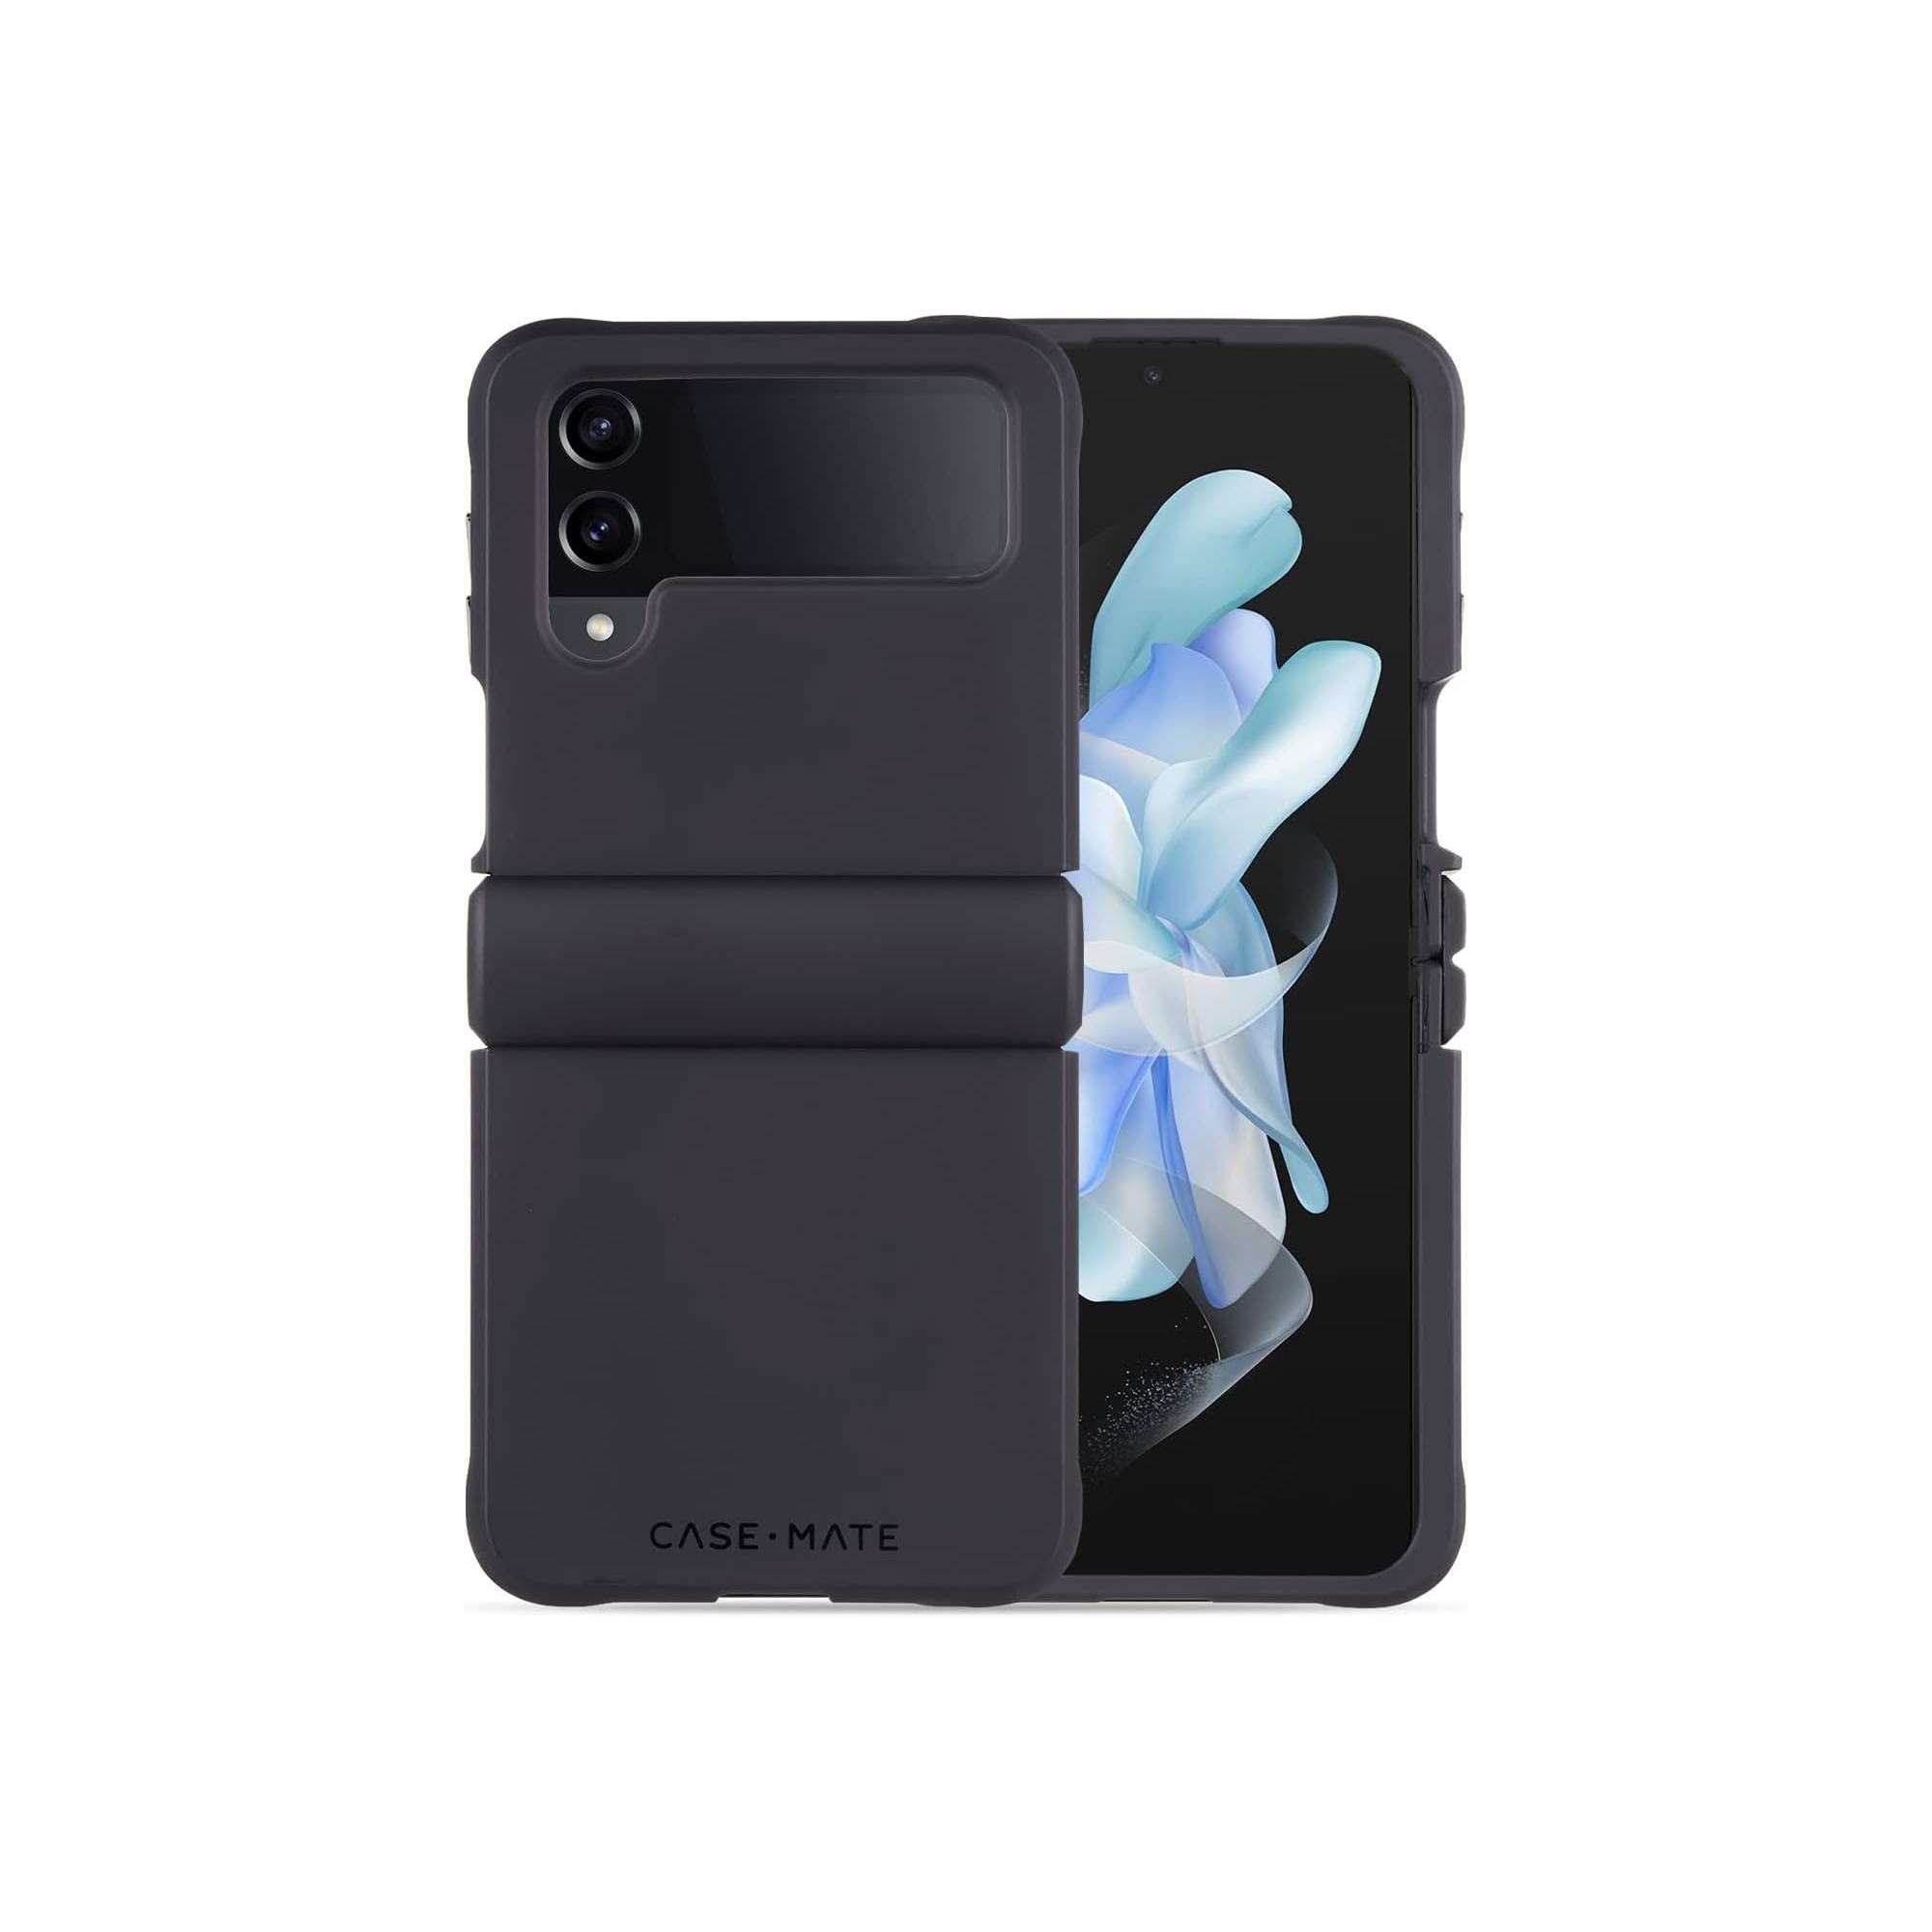 A Samsung Galaxy Z Flip 4 in a case-mate tough series cover flipped open on a white background